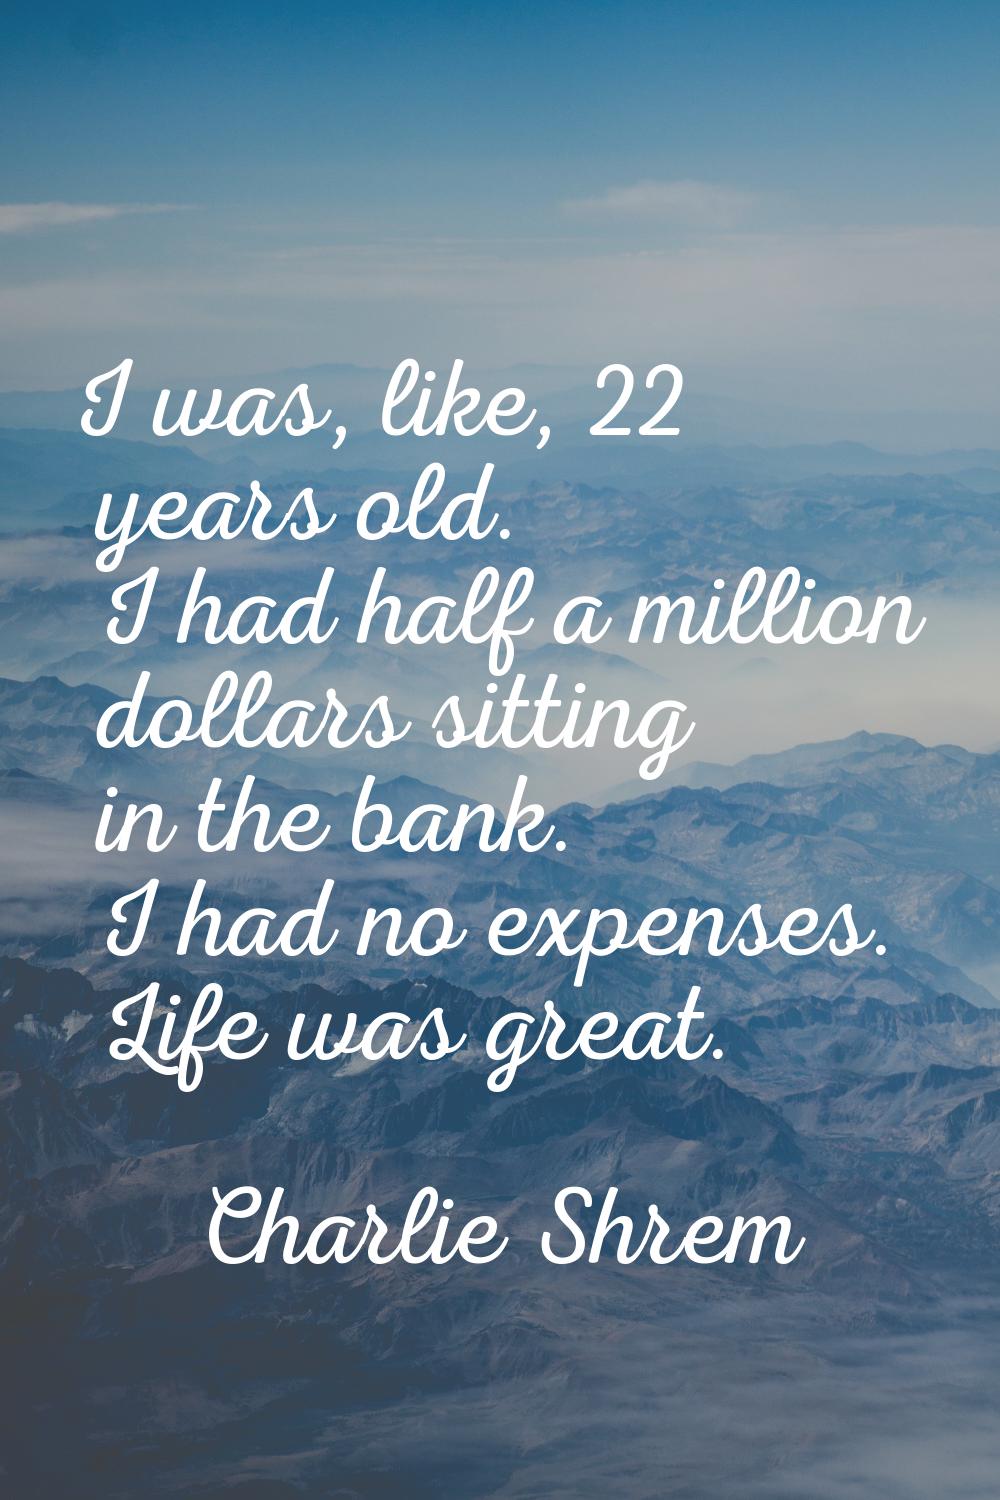 I was, like, 22 years old. I had half a million dollars sitting in the bank. I had no expenses. Lif